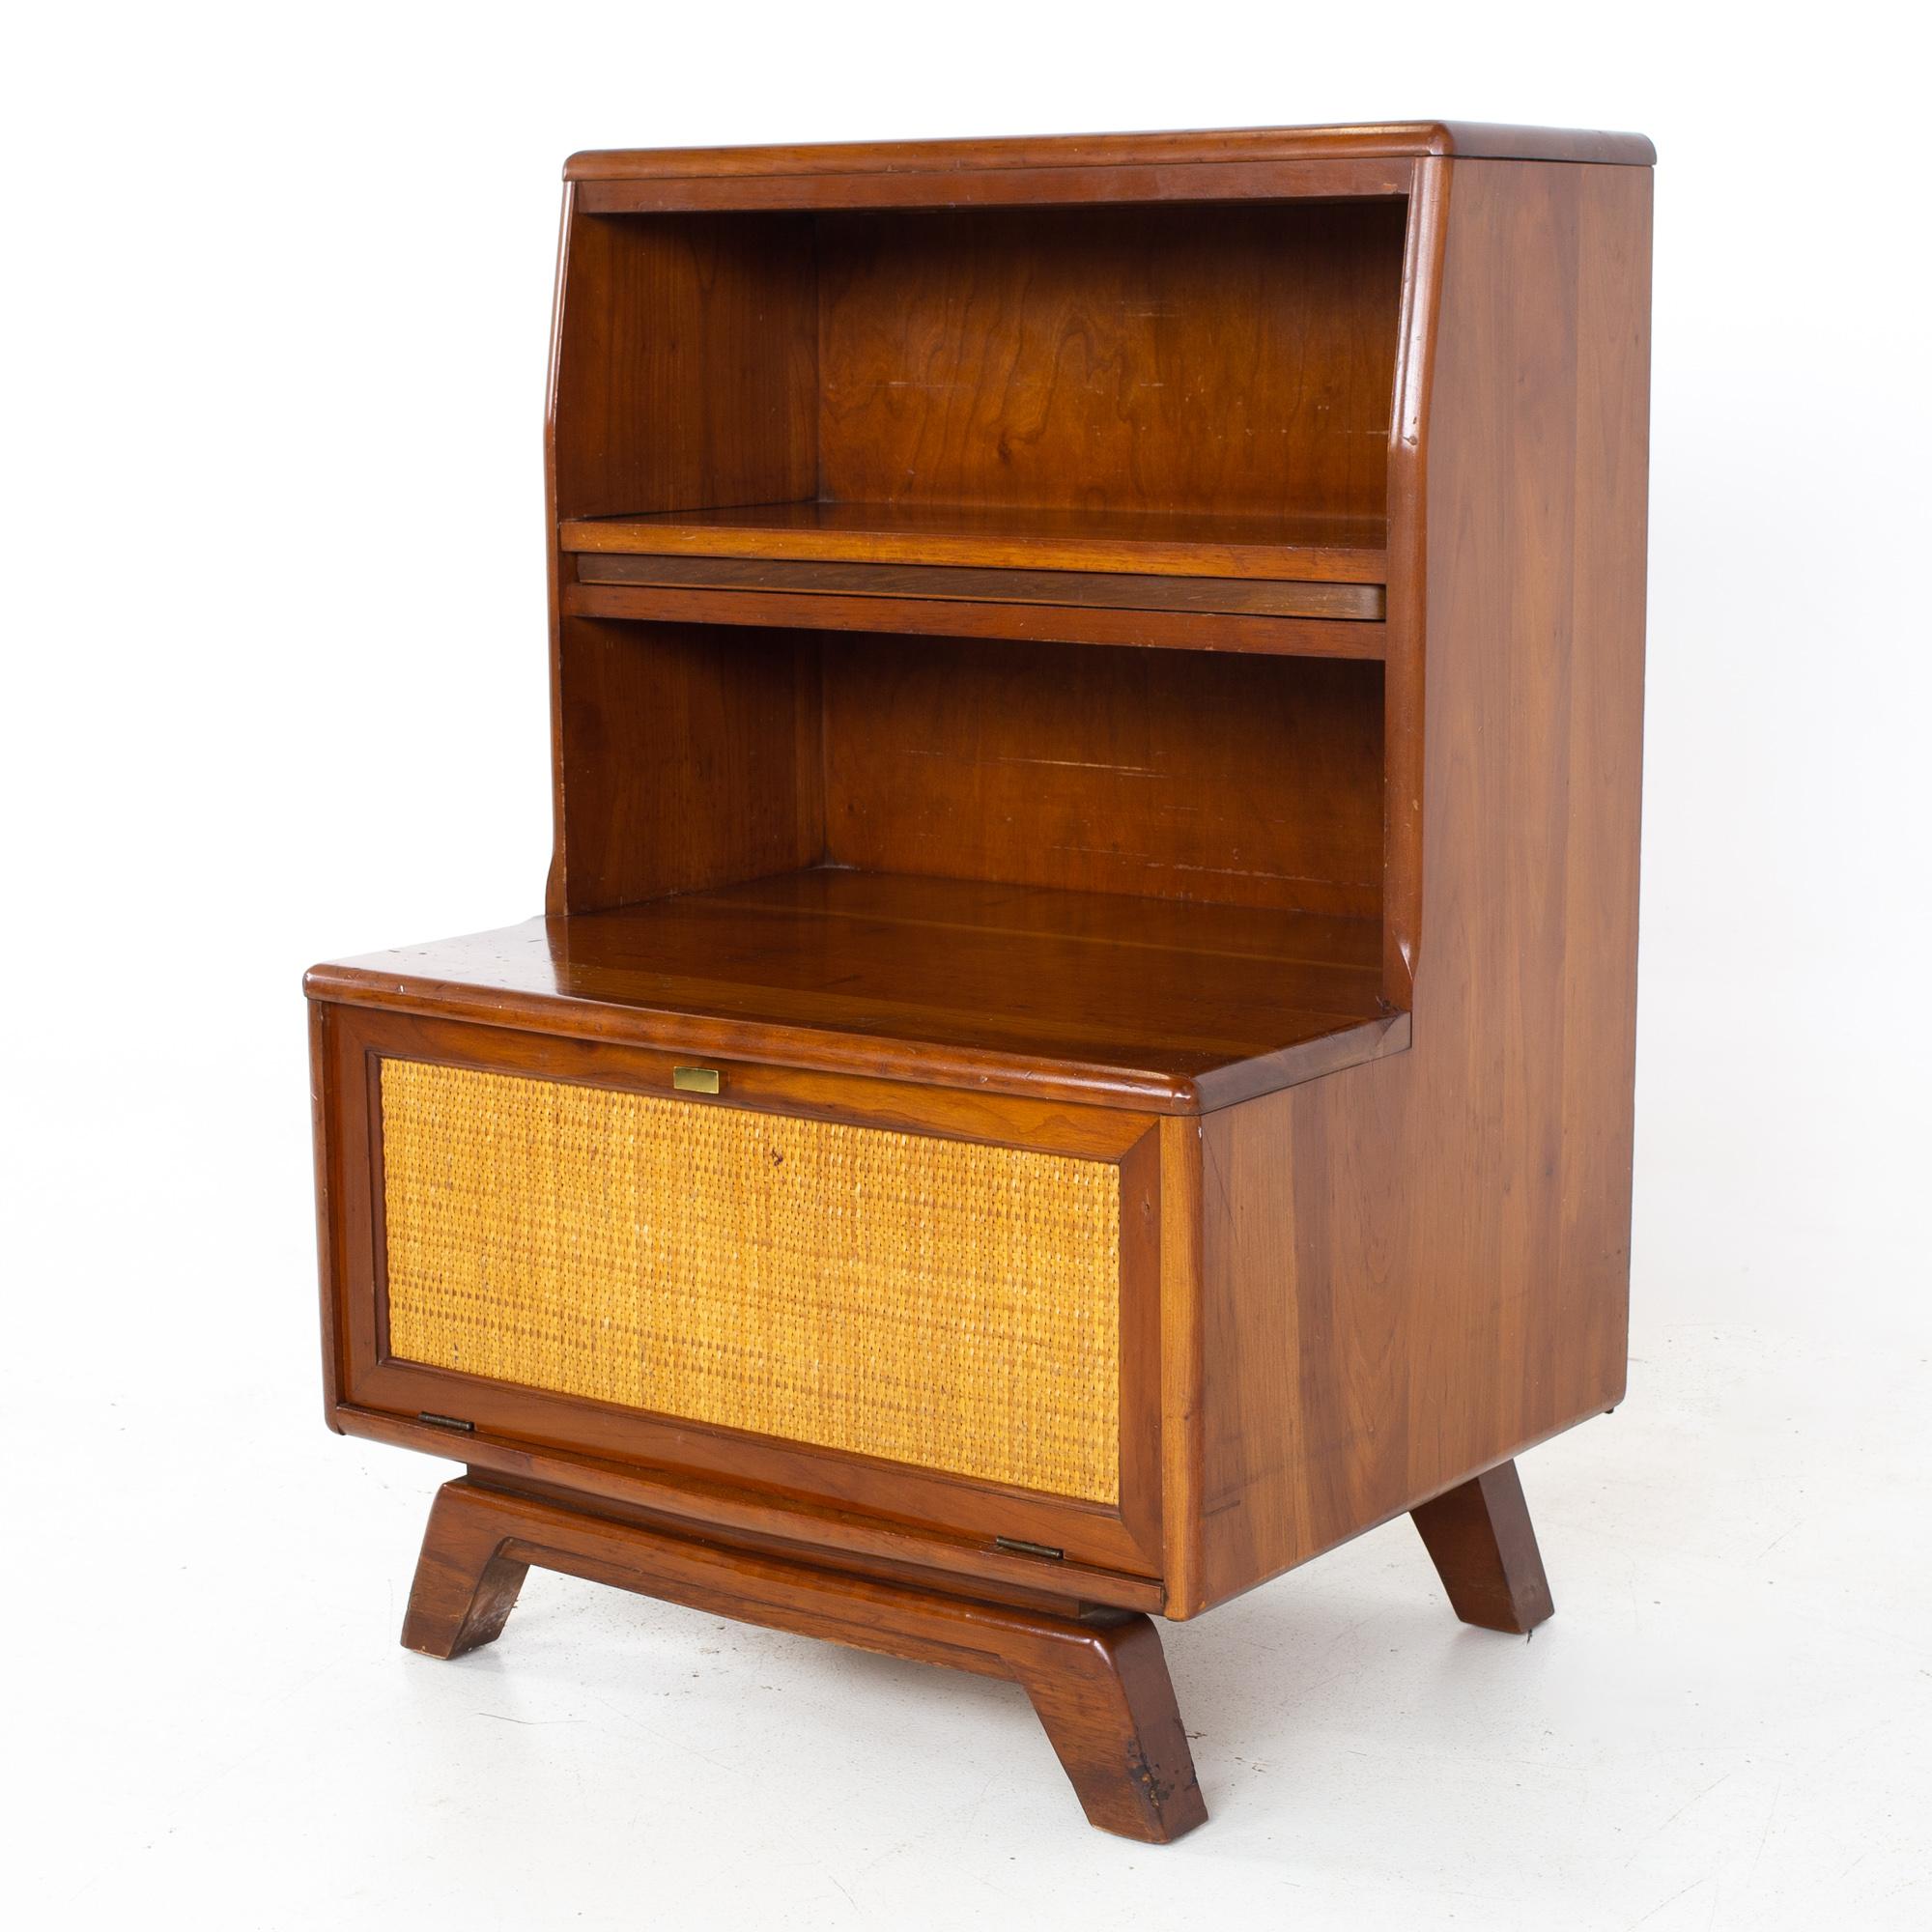 American Mid Century Solid Cherry and Cane Extendable Shelf Nightstands, a Pair